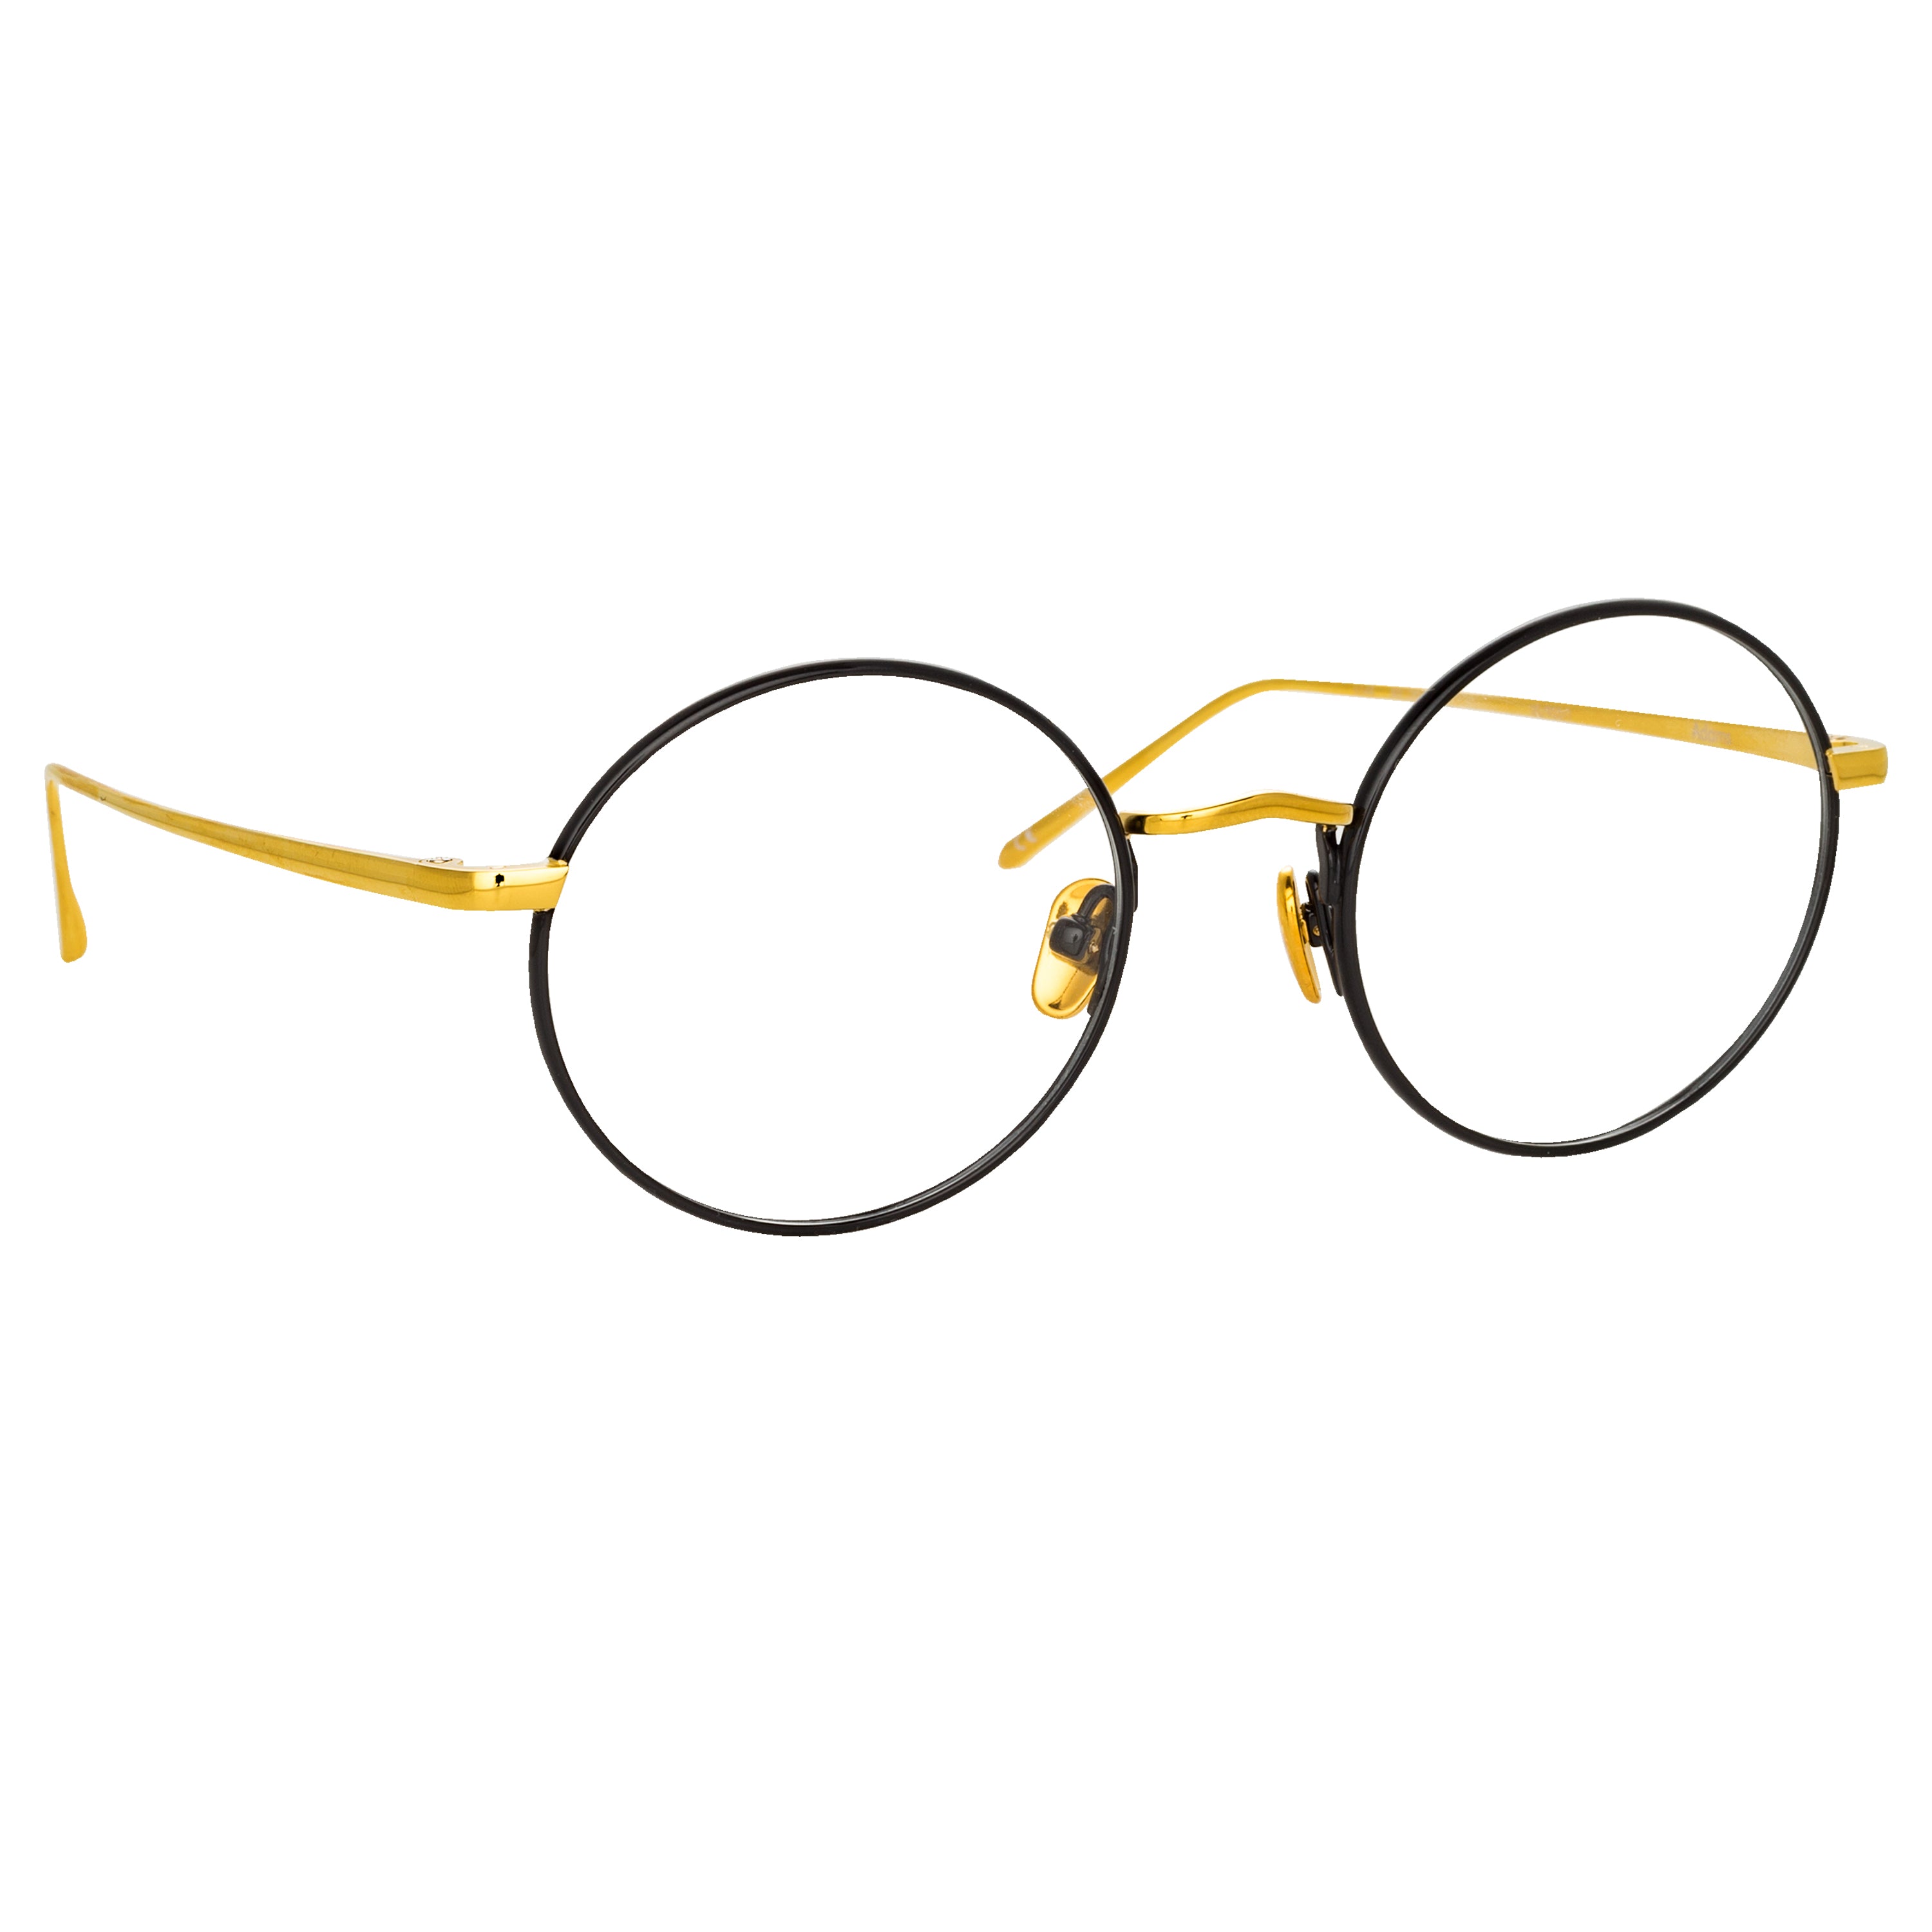 The Adams Men’s Oval Optical Frame in Black and Yellow Gold (C1)